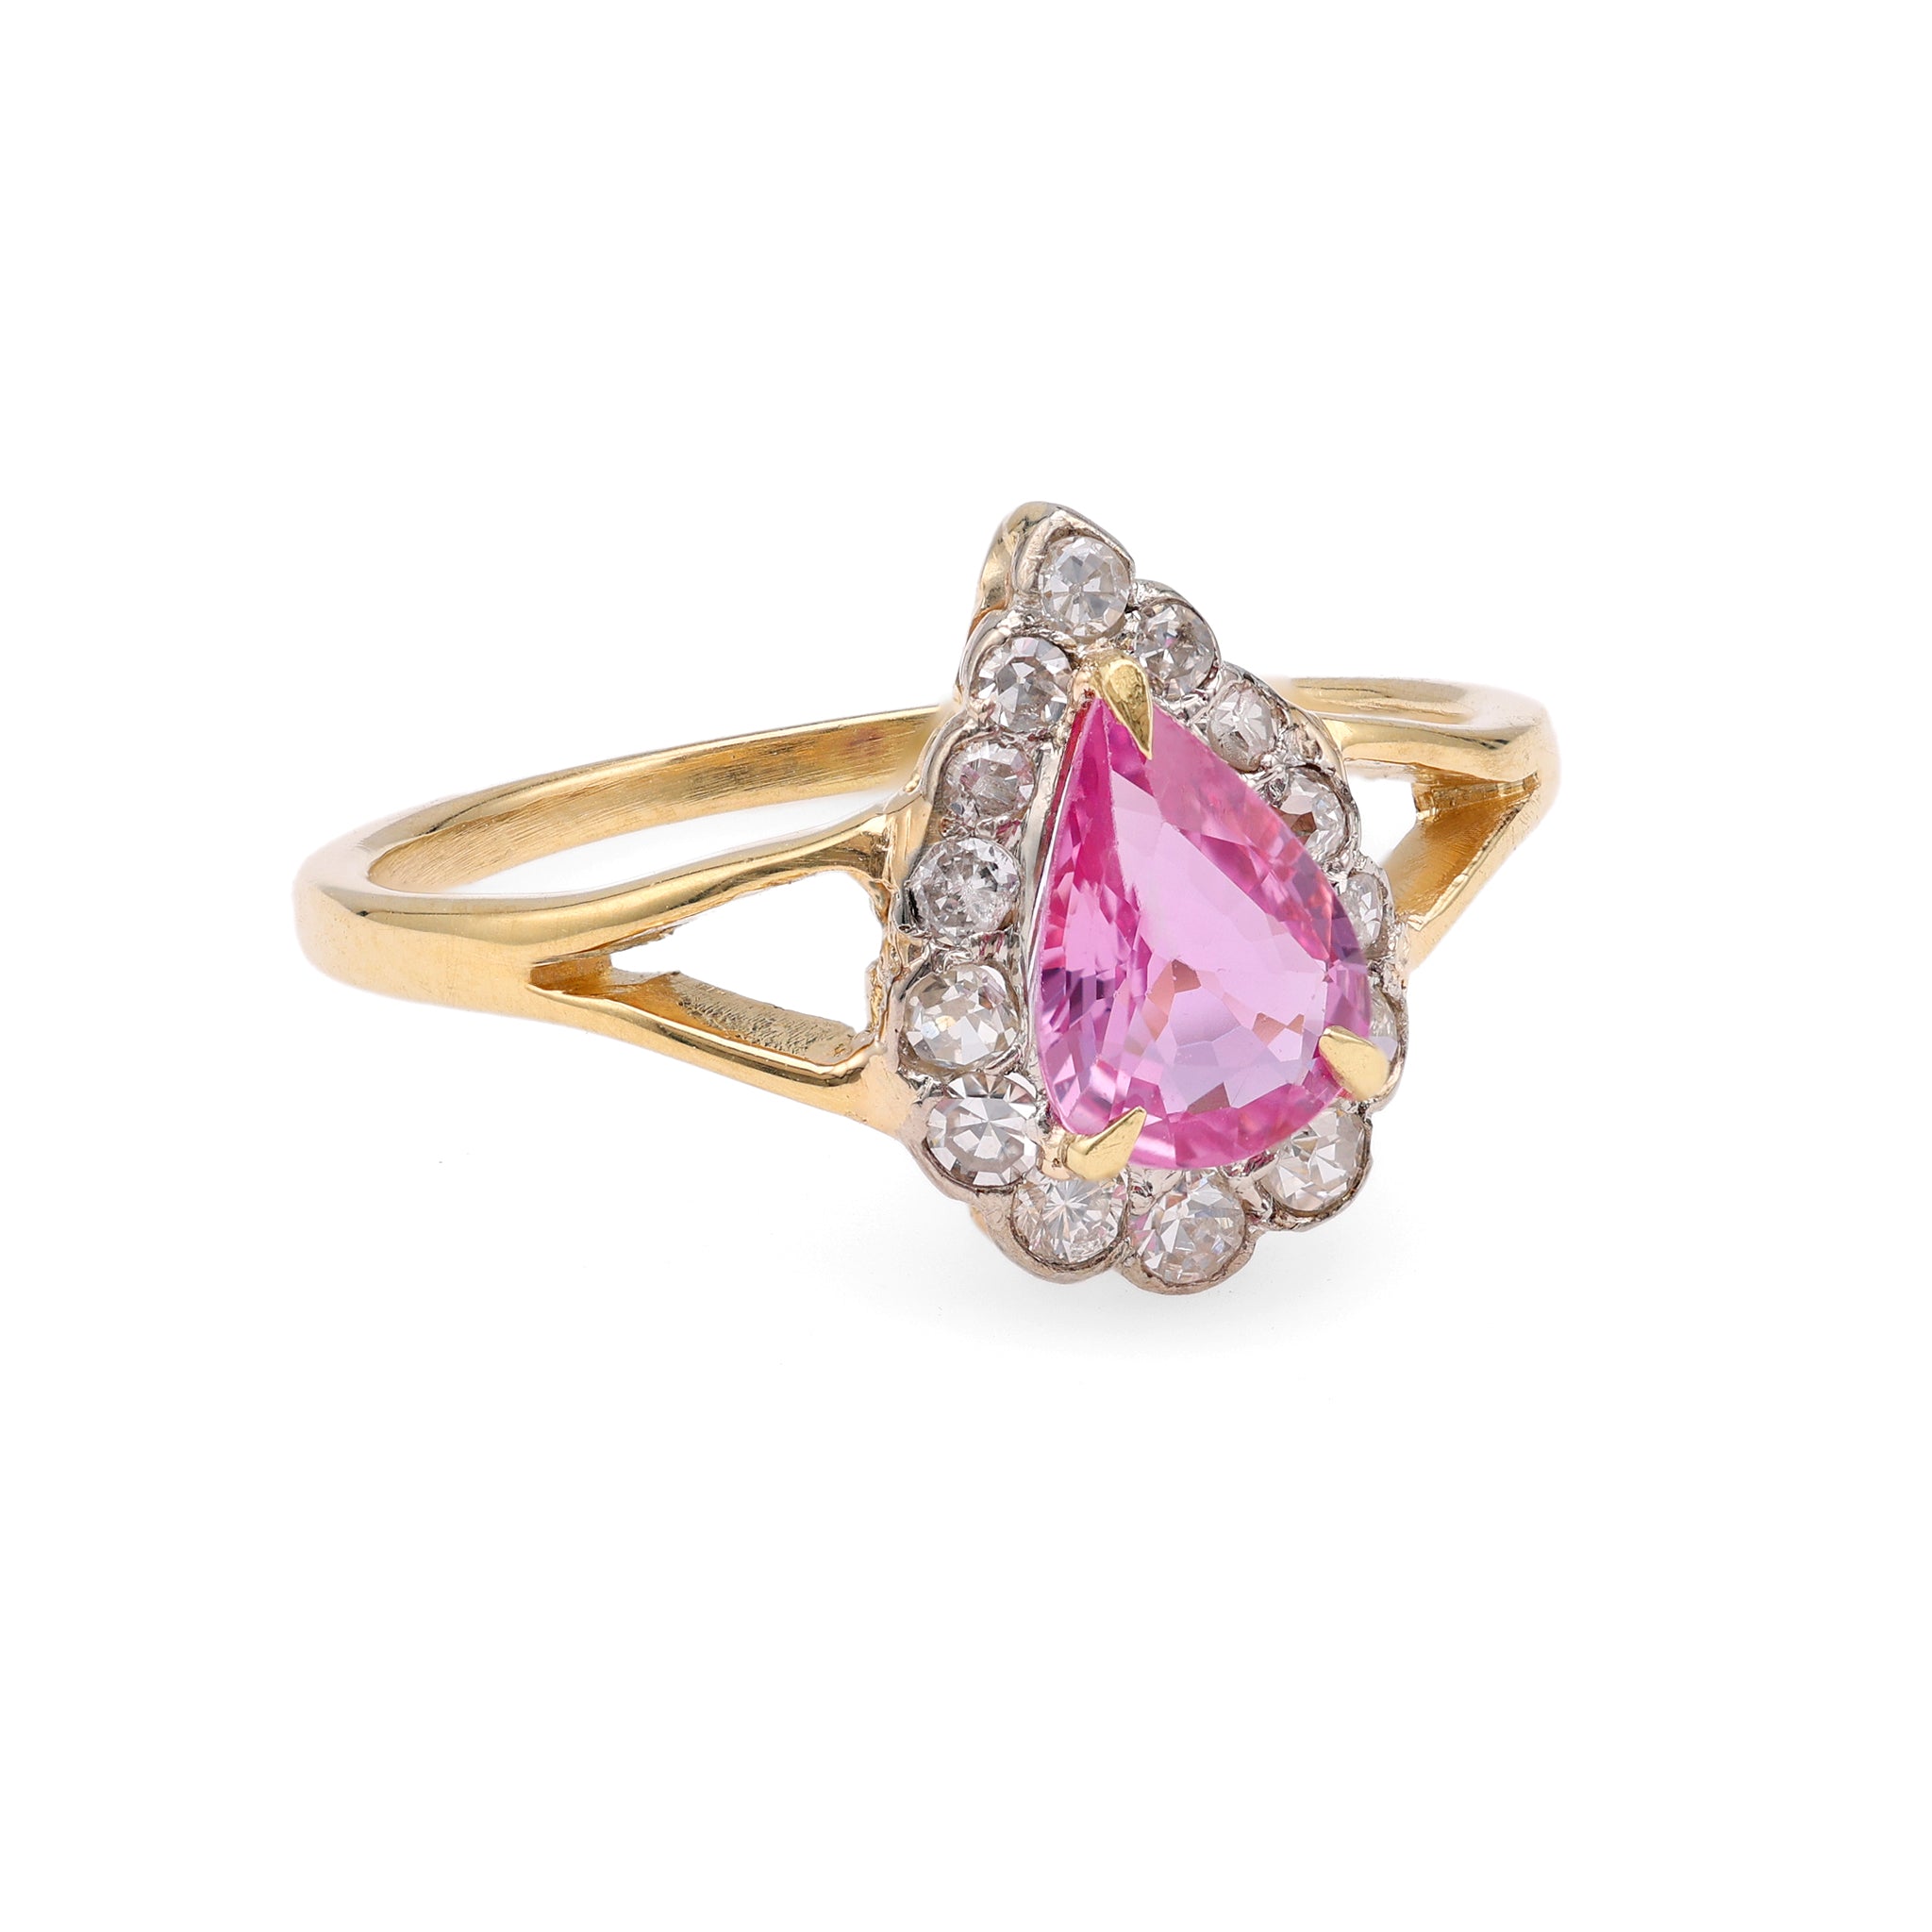 Vintage Pink Sapphire Diamond 18k Yellow Gold Ring Rings Jack Weir & Sons   